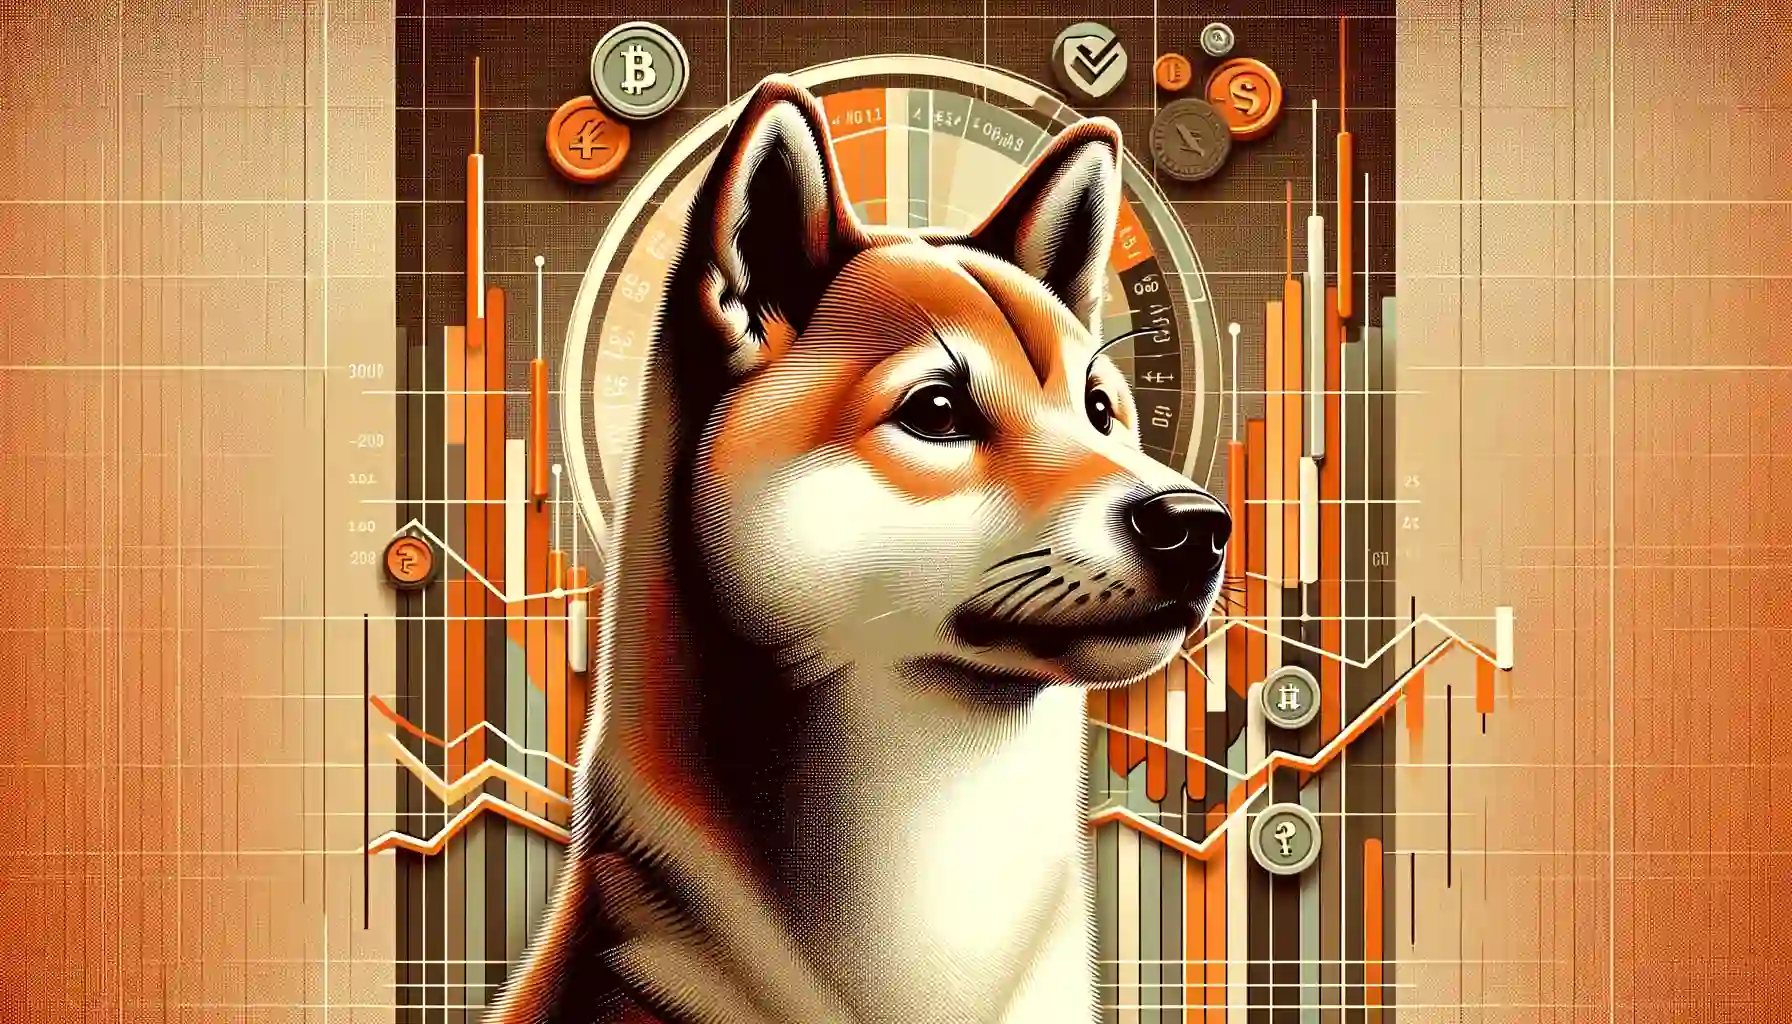 SHIB prices slide 20% in 7 days – A sign of market top?